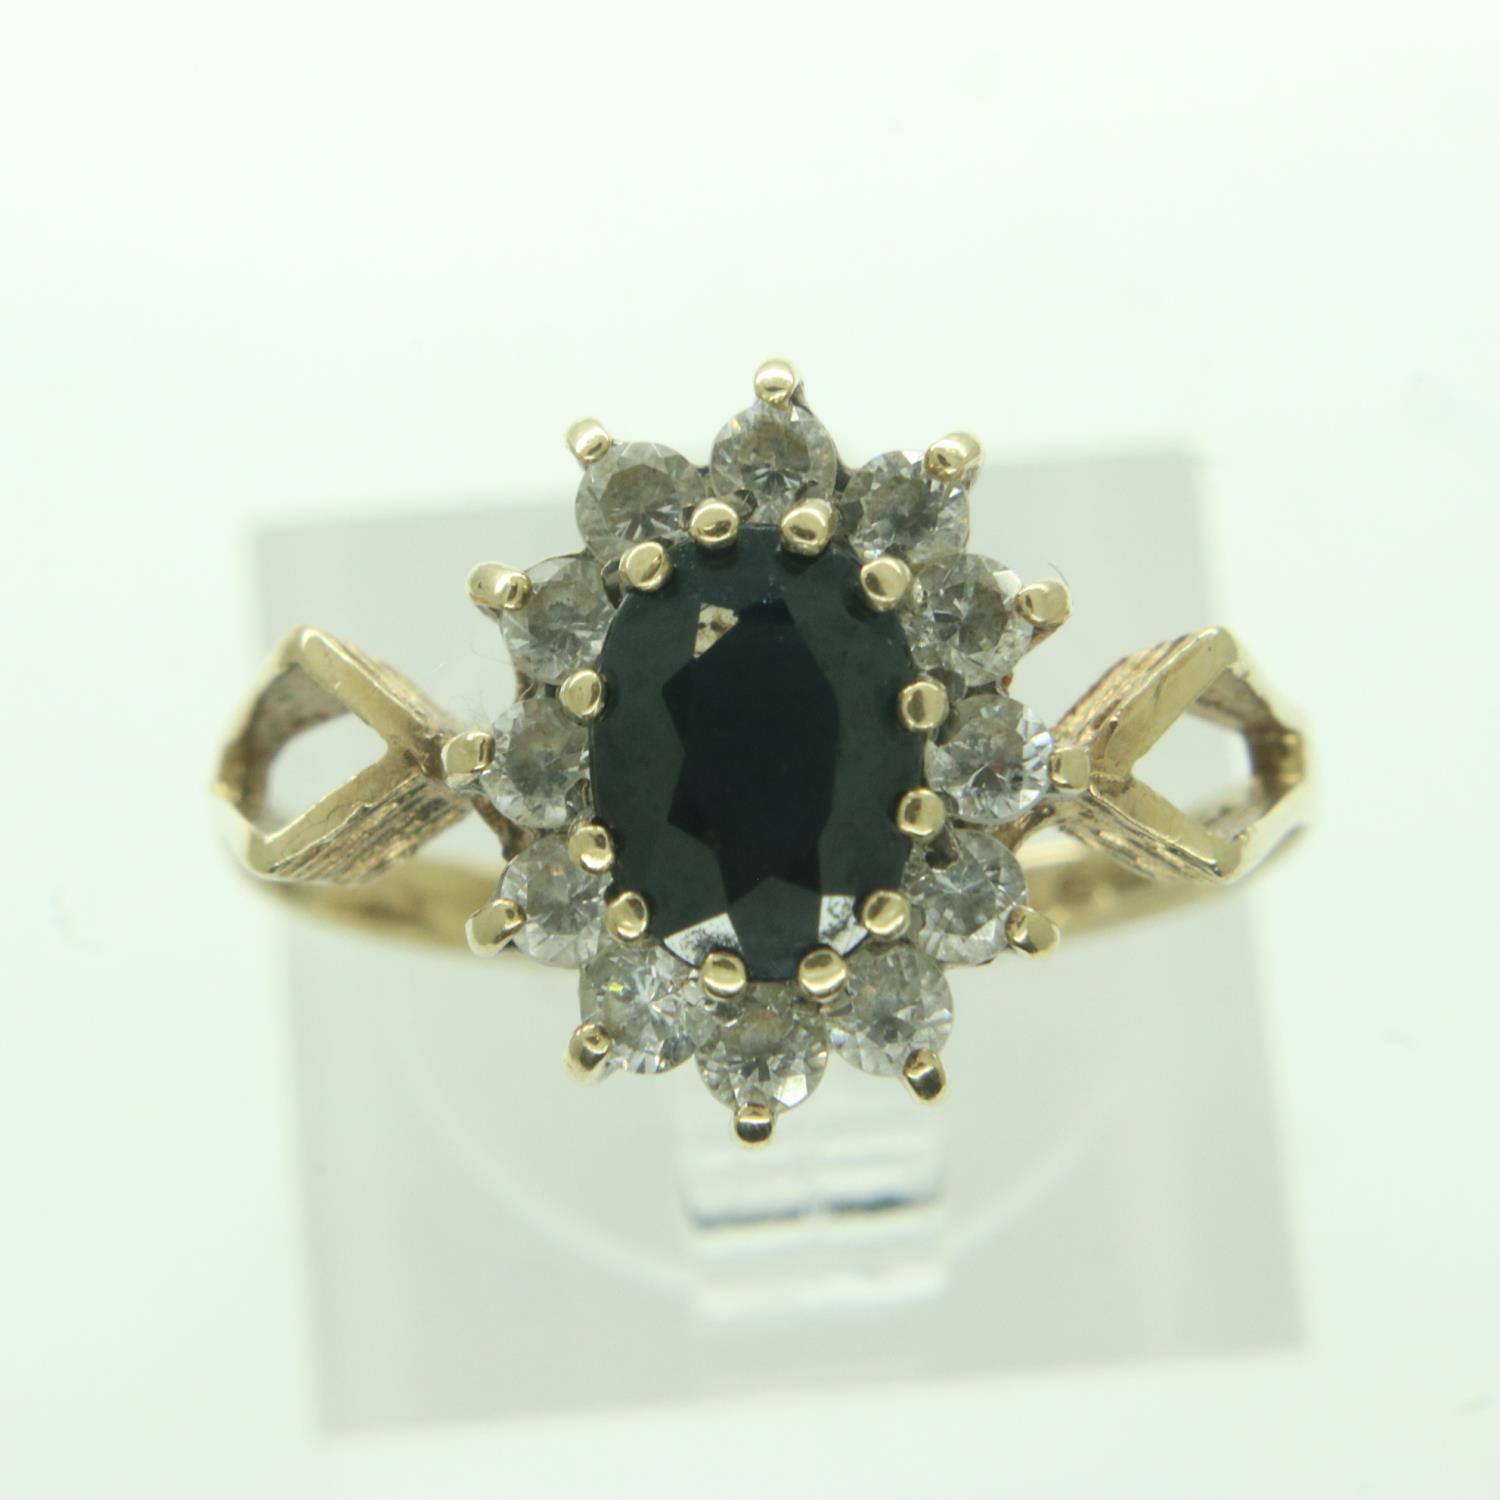 9ct gold cluster ring set with sapphire and cubic zirconia, size Q, 2.2g. UK P&P Group 0 (£6+VAT for